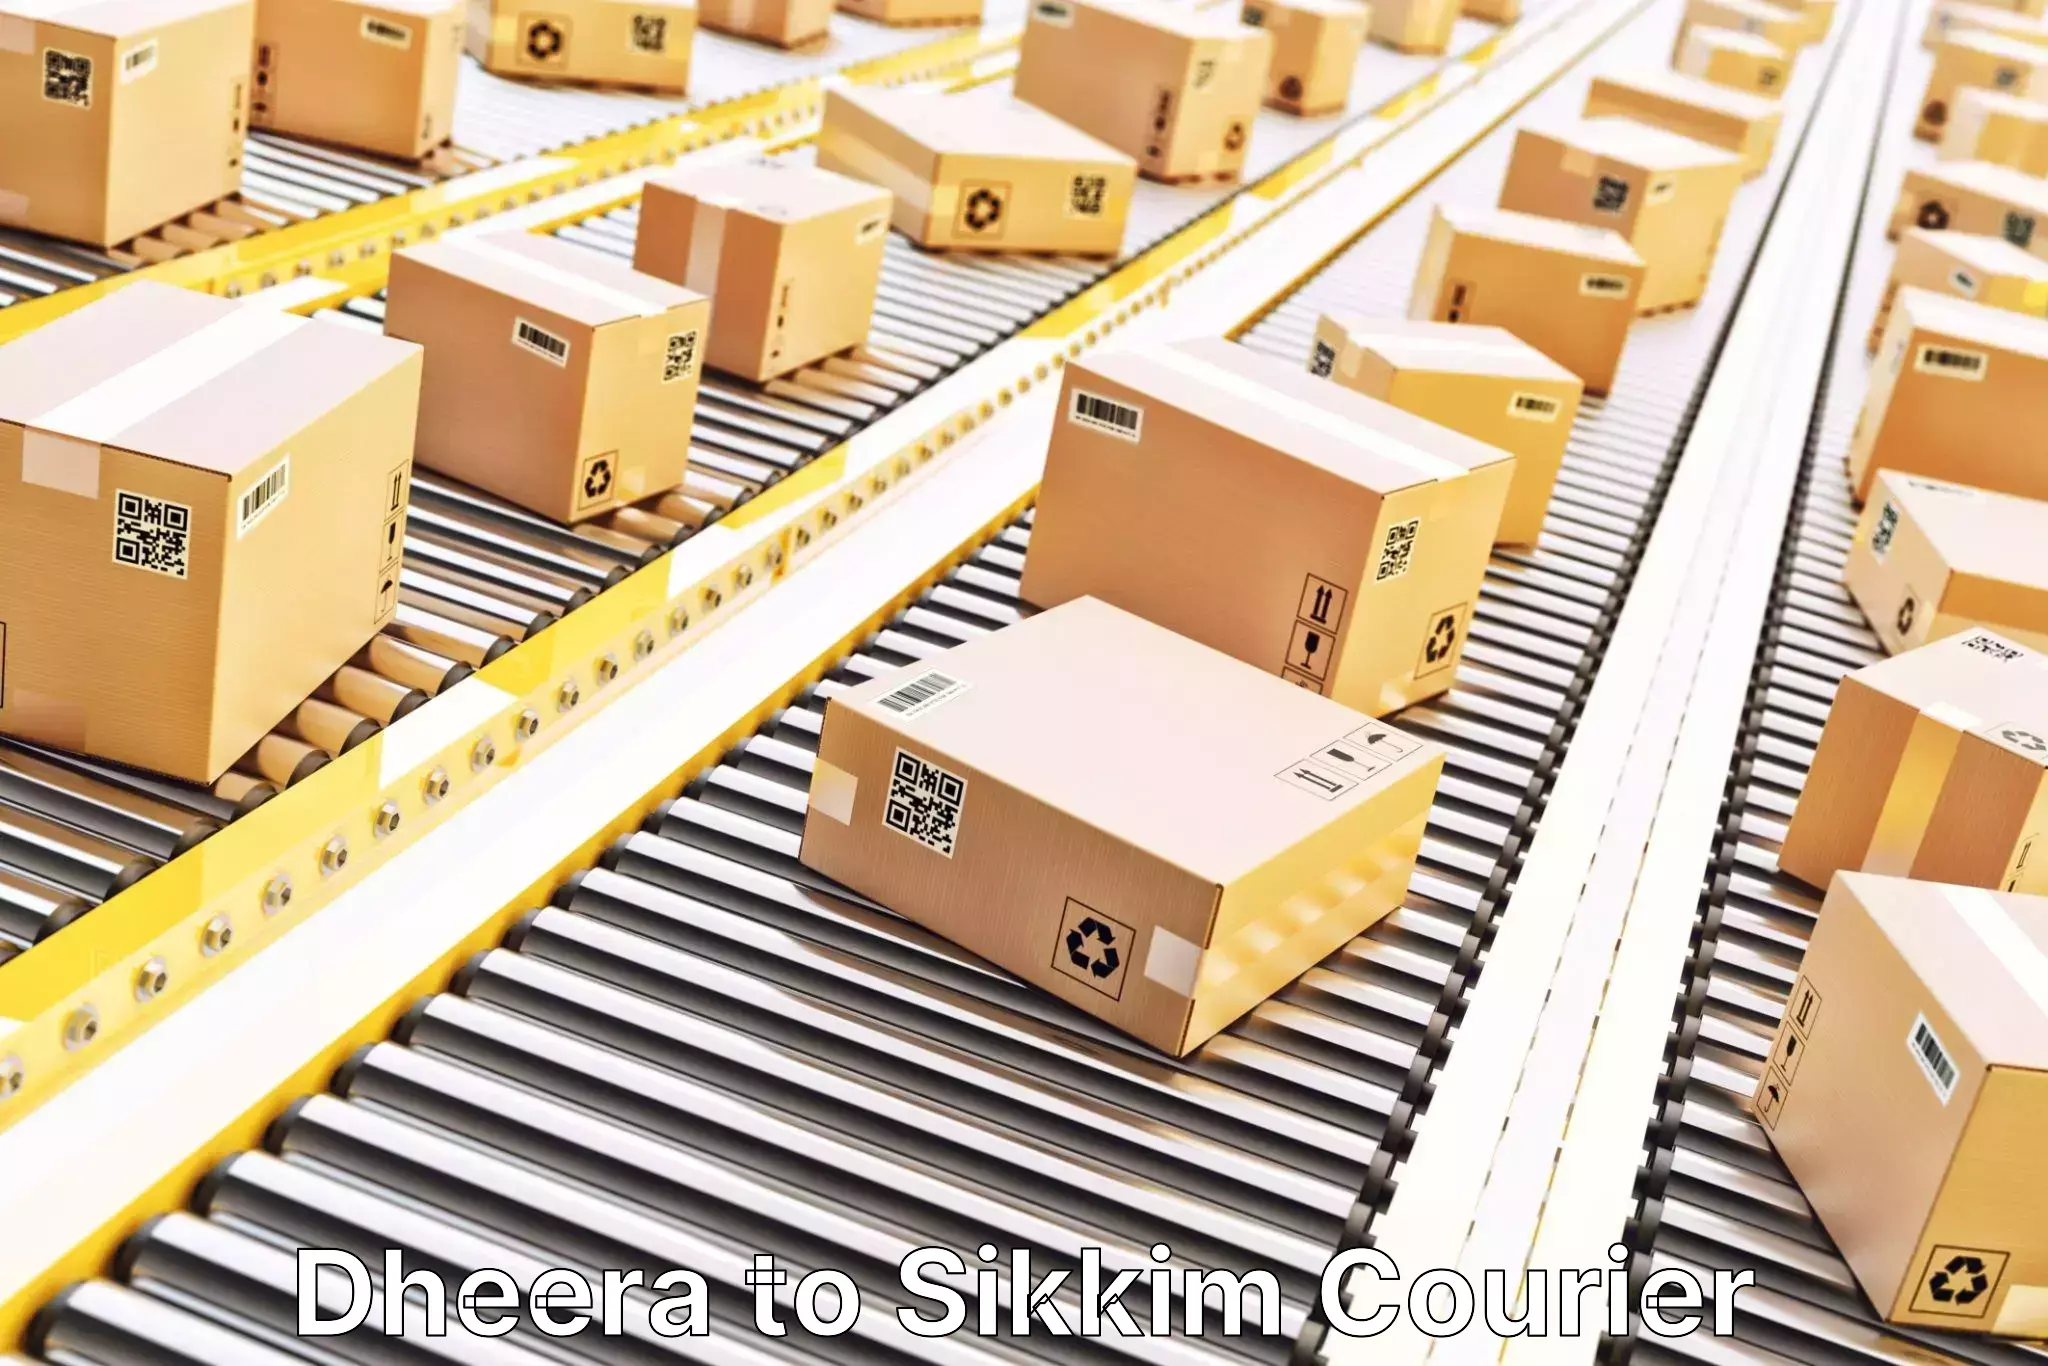 Seamless shipping service Dheera to Sikkim